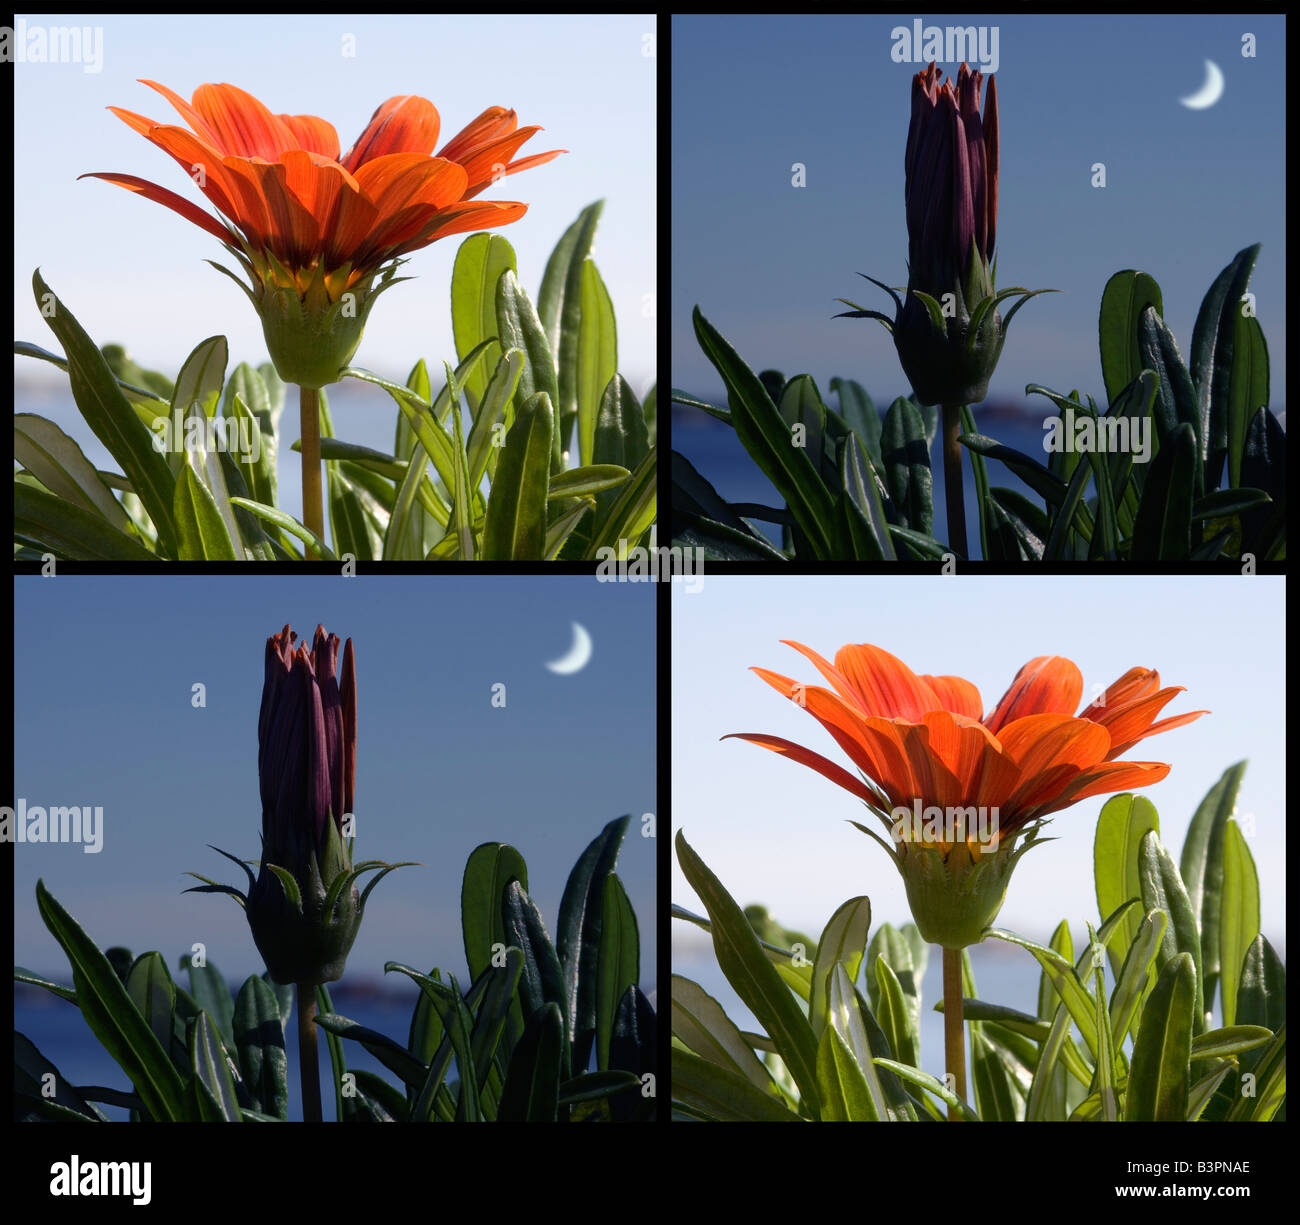 A four panel sequence collage demonstrating the photosensitivity of a Gazania flower which closes at night. Stock Photo